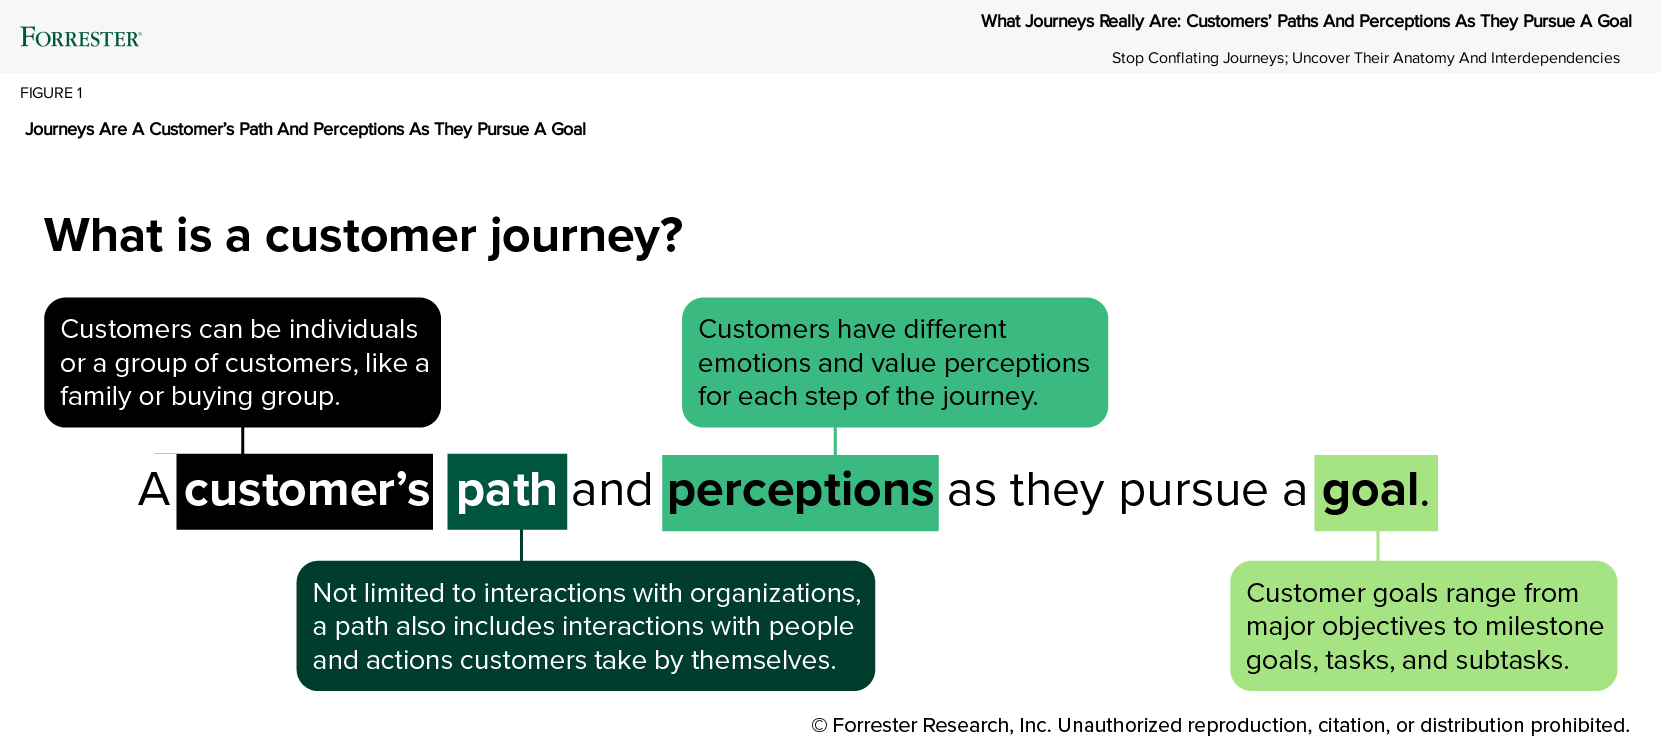 The definition of a customer journey as A customer’s path and perceptions as they pursue a goal